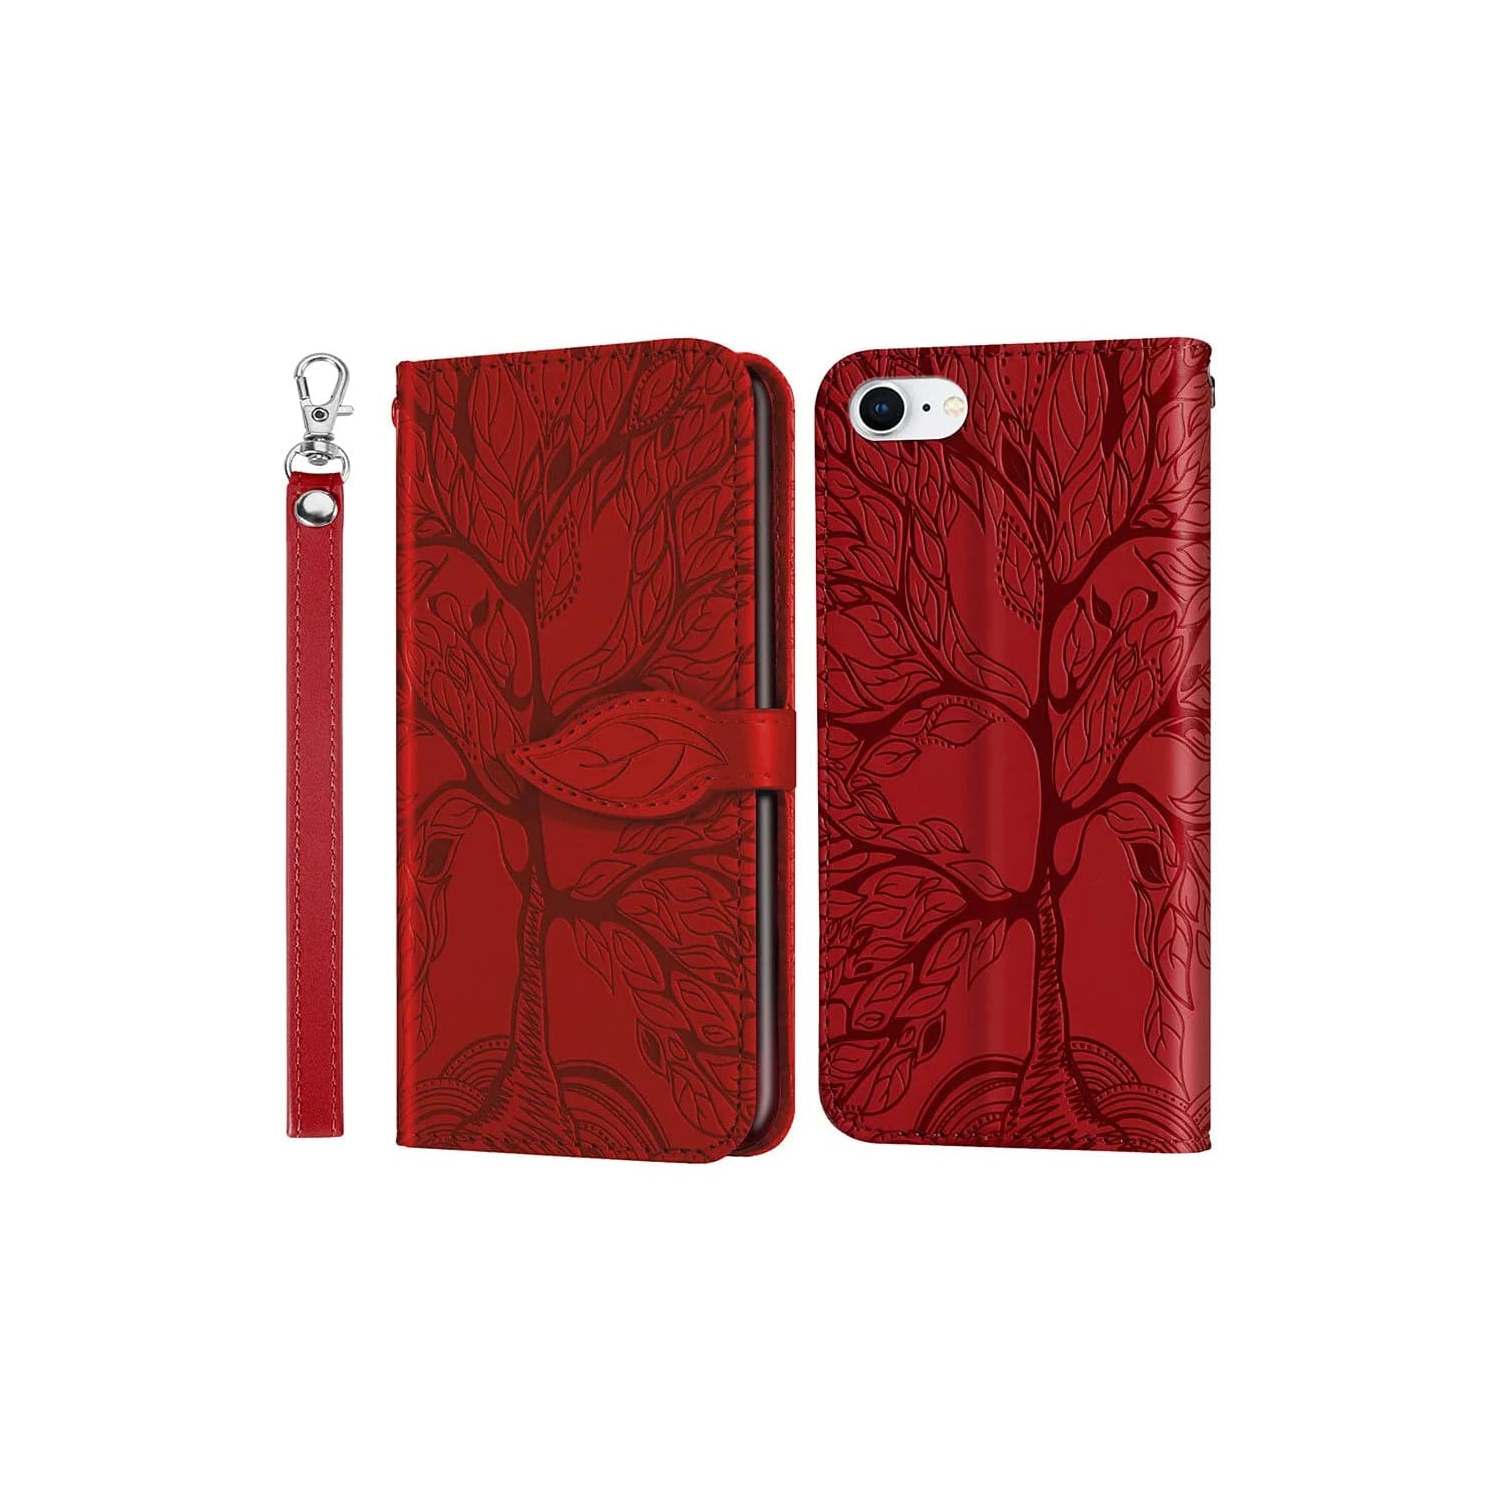 Premium PU Leather Embossed Tree Wallet Case with card slots and wrist strap for iPhone SE 2022 and SE 2020 / iPhone 7 and 8